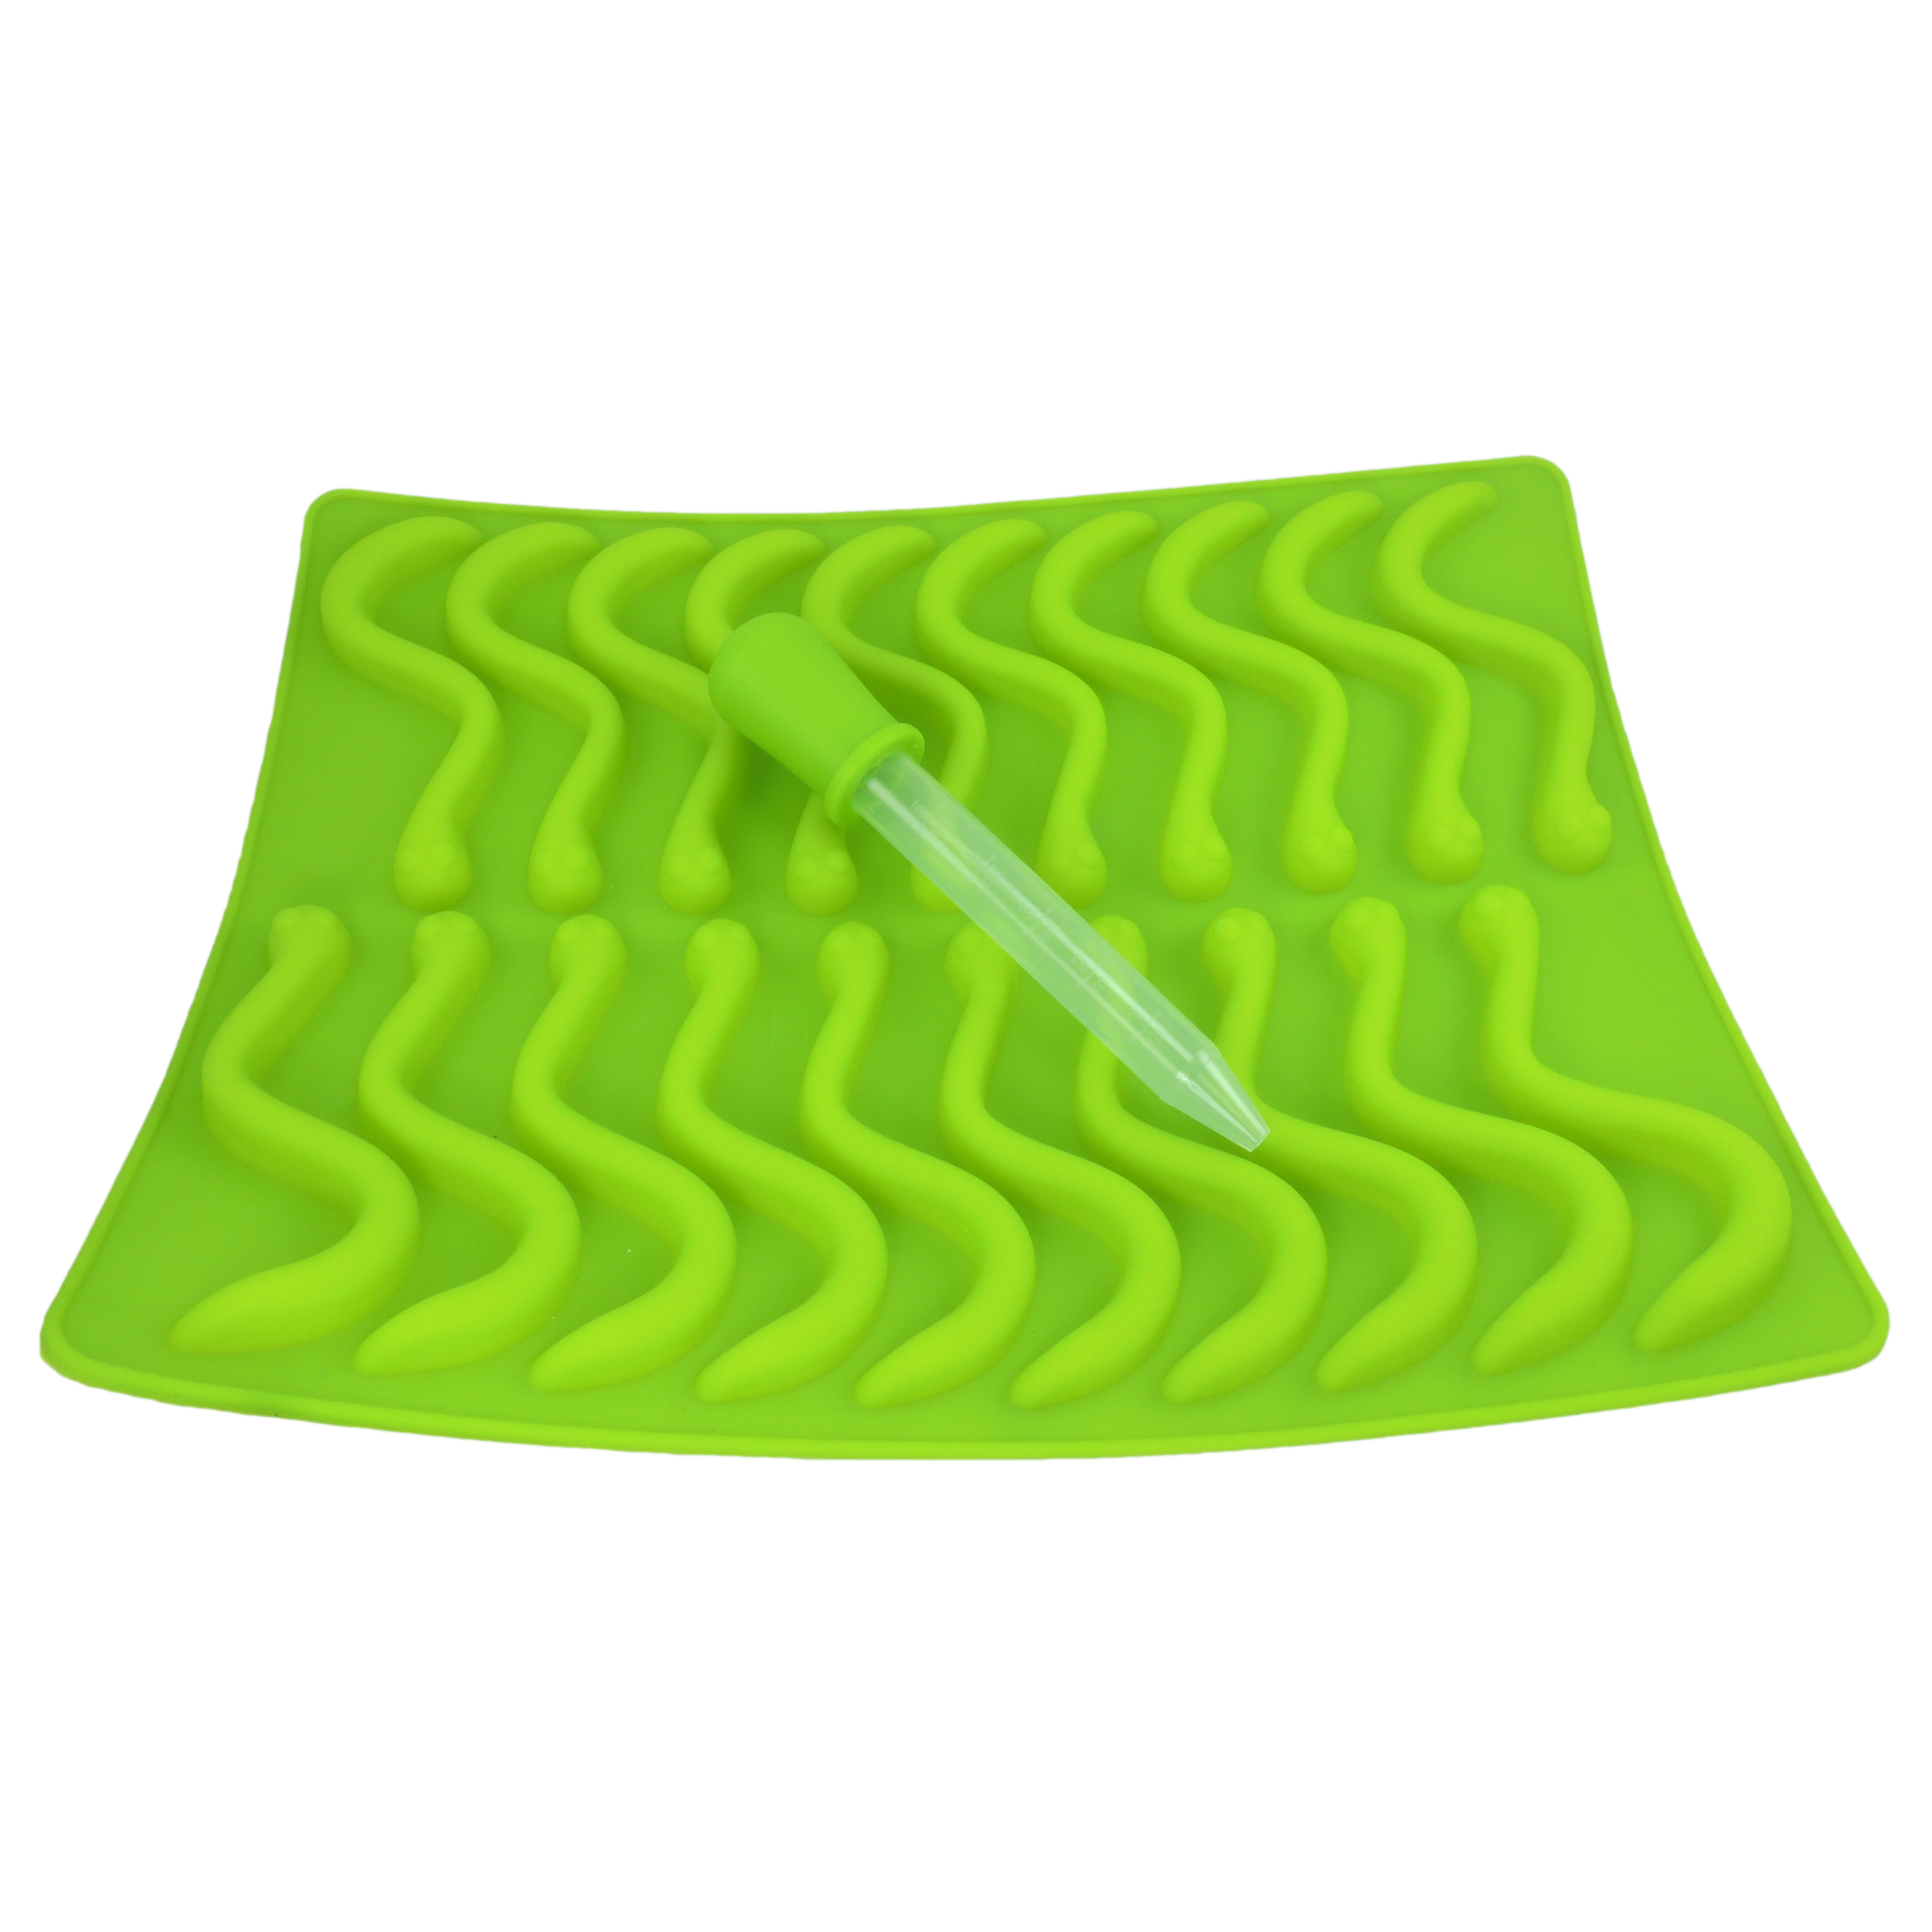 Gummy Worms Mold Maker Homemade Gummies Candy Making Kids Snacks Worm Molds Tray - image 1 of 5